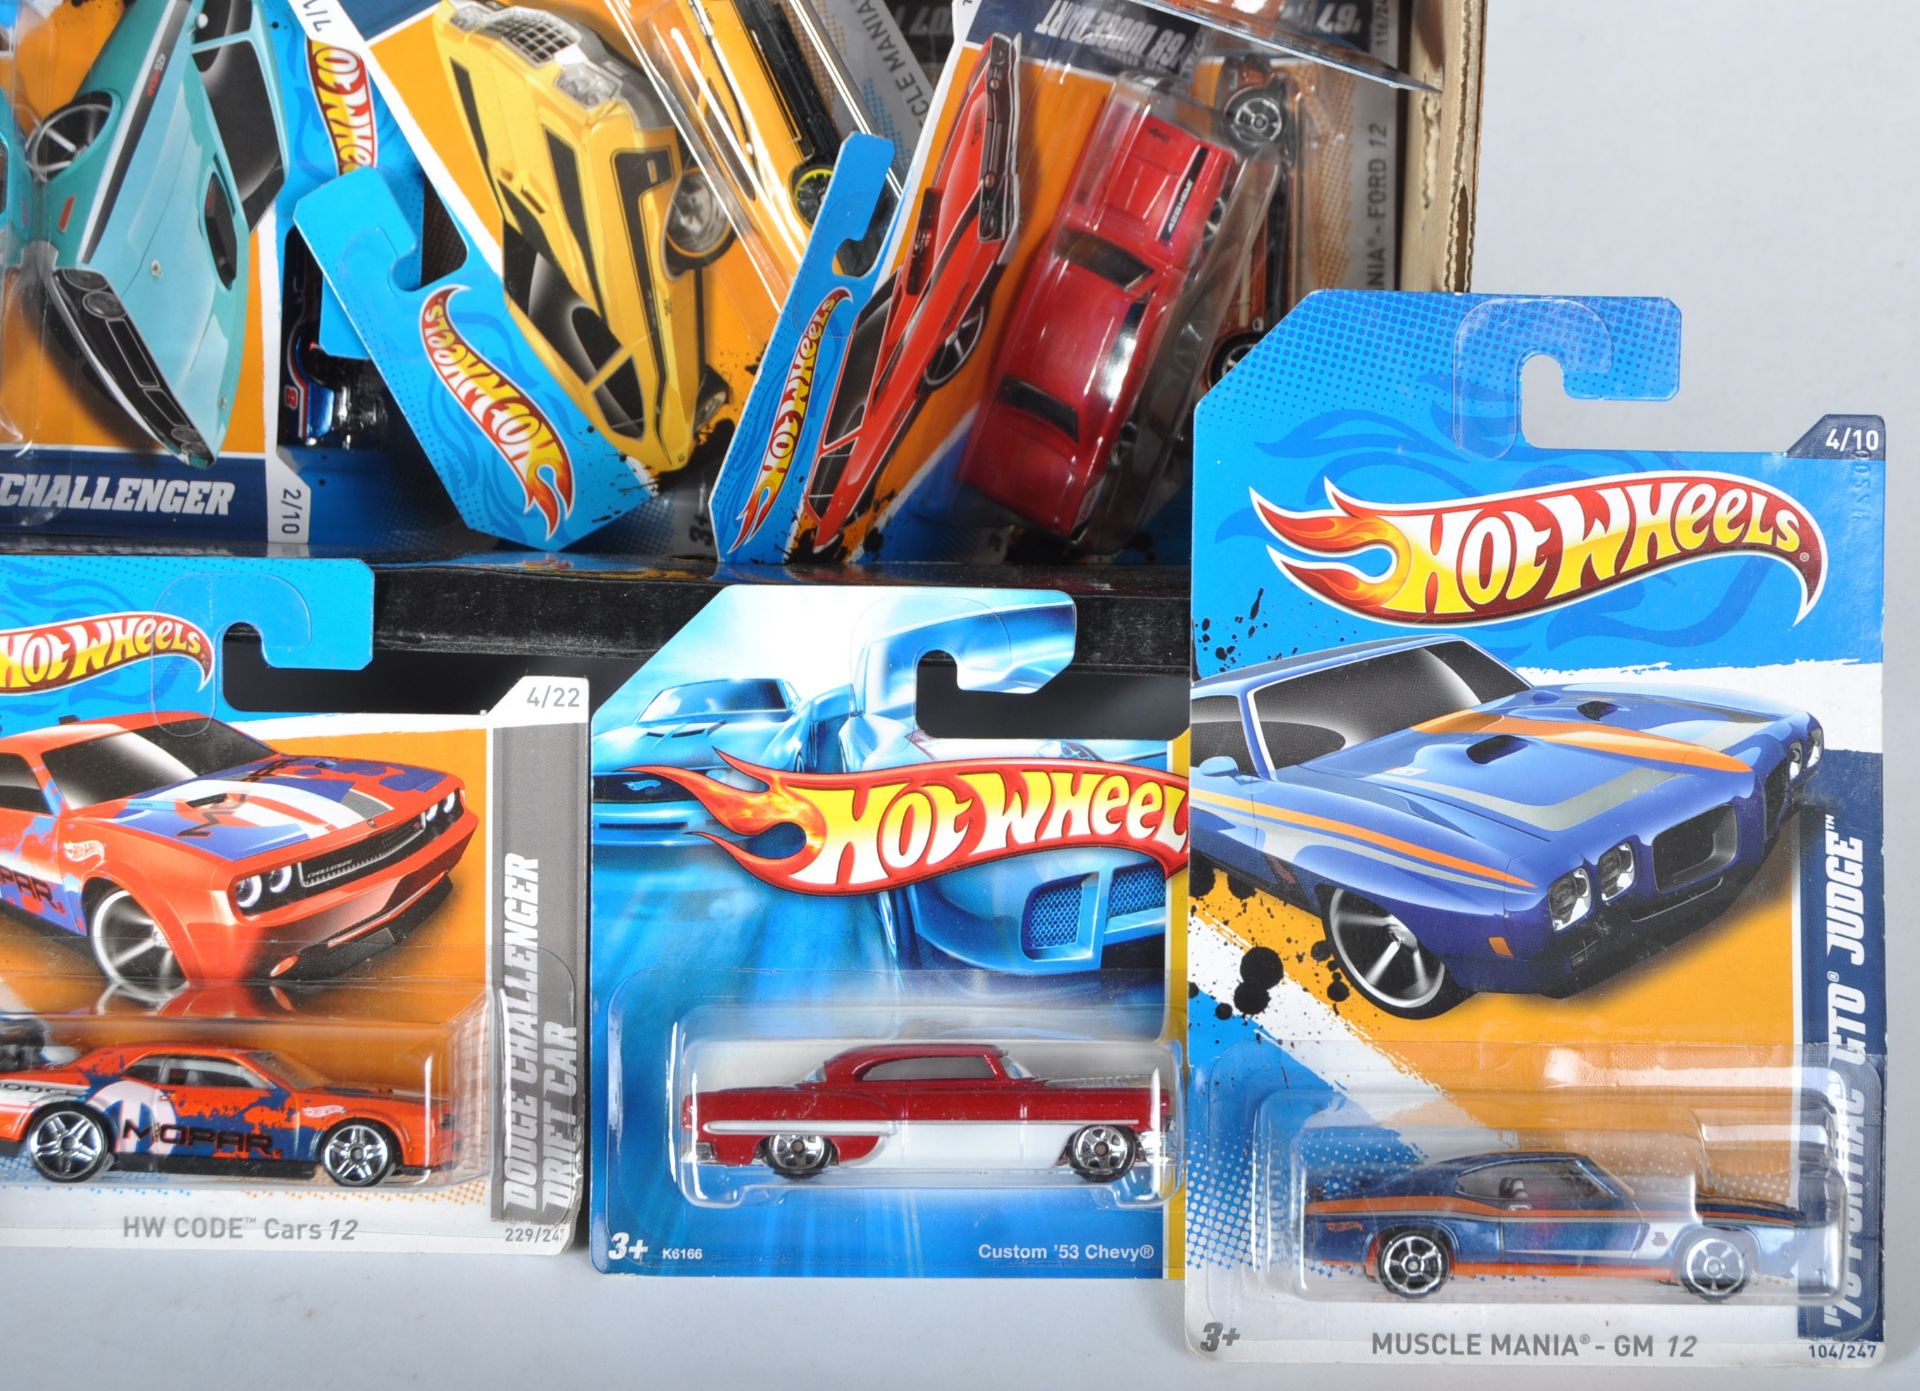 COLLECTION OF ASSORTED CARDED MATTEL HOT WHEELS DIECAST MODELS - Image 3 of 6